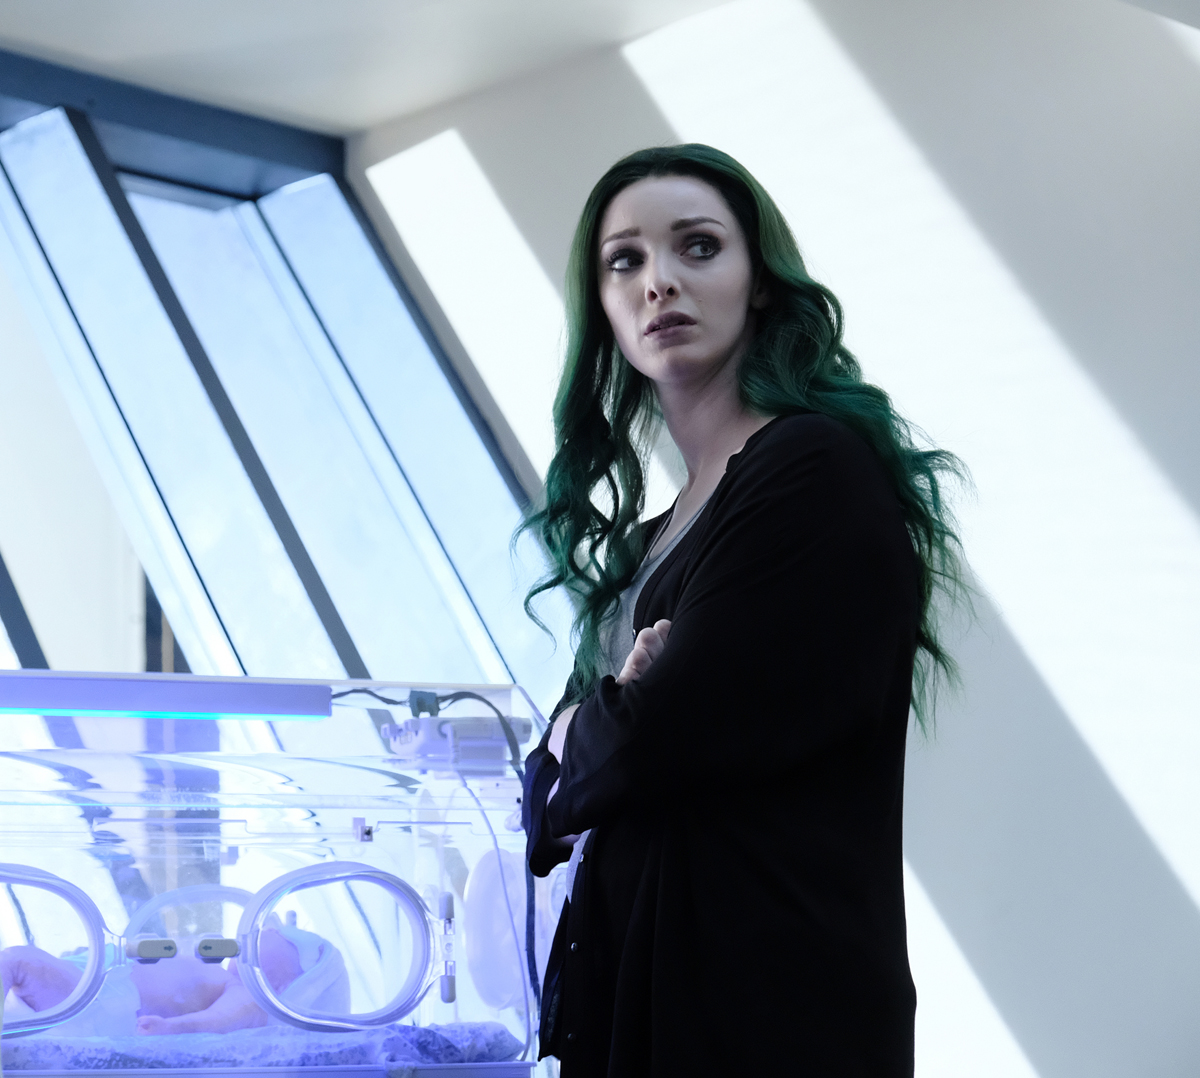 THE GIFTED Actress Emma Dumont talks about Polaris on Season 2  Exclusive  Interview  Assignment X